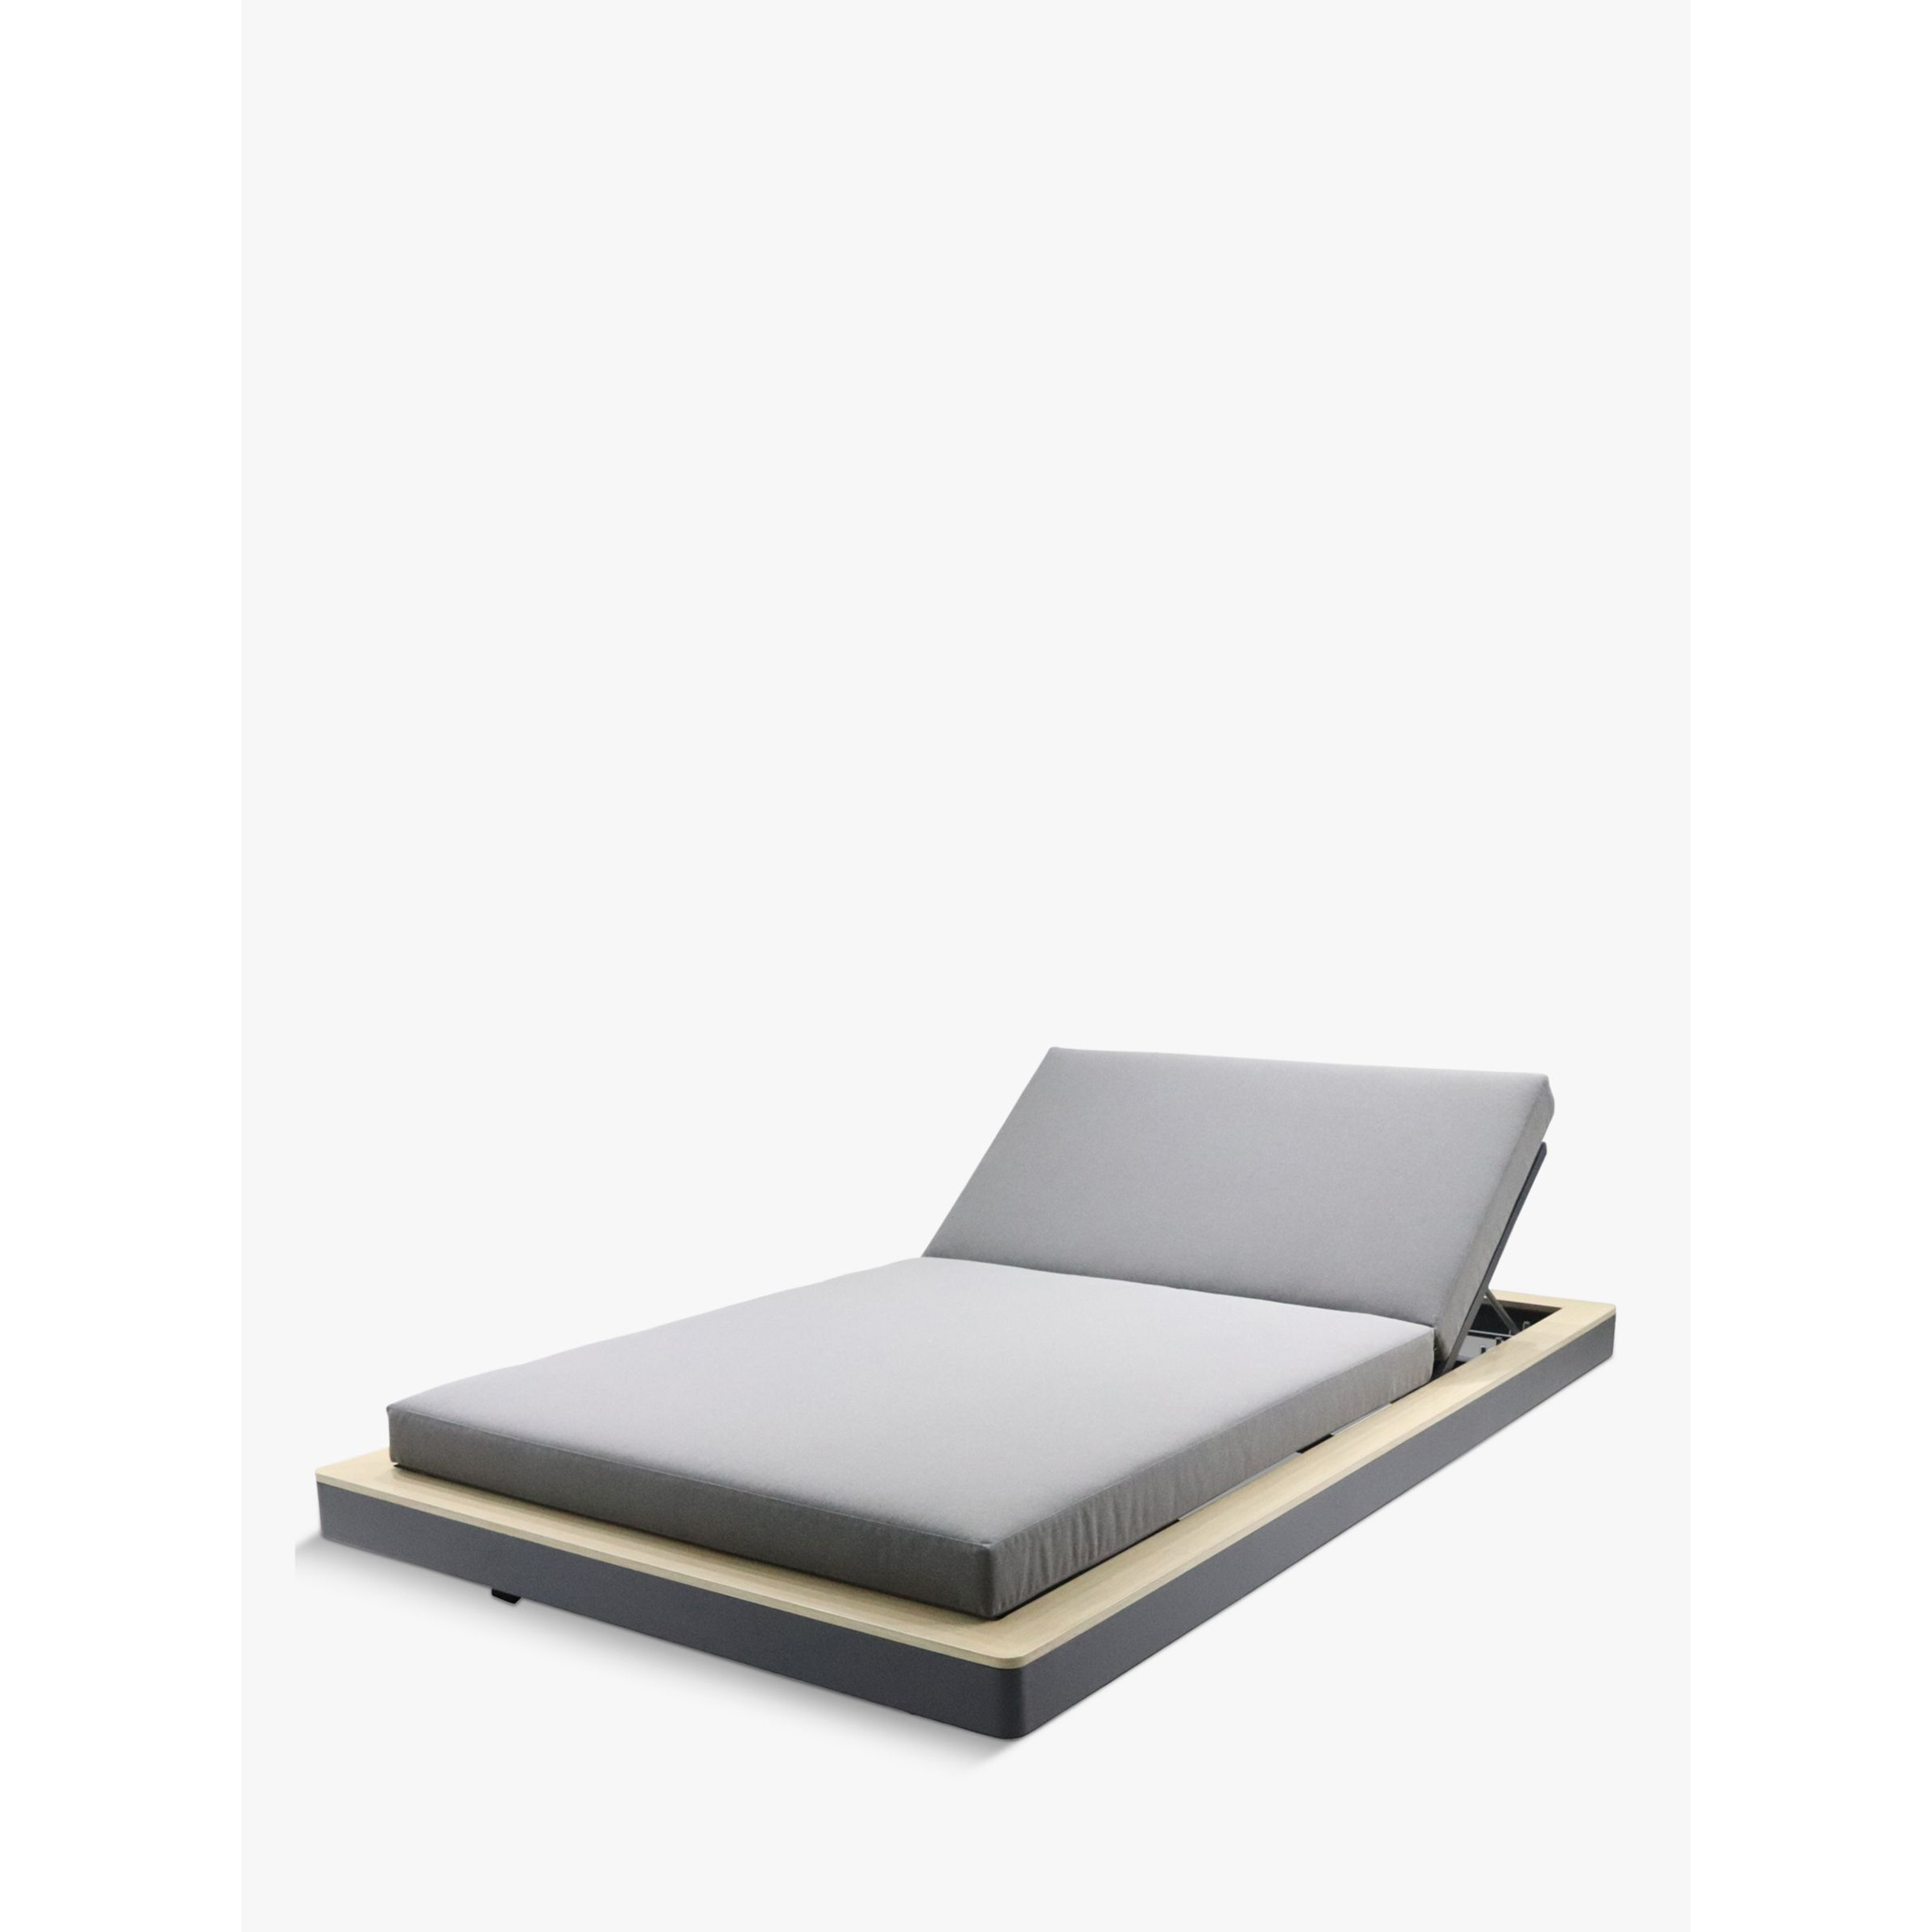 LG Outdoor Venice Garden Reclining Daybed, Grey - image 1